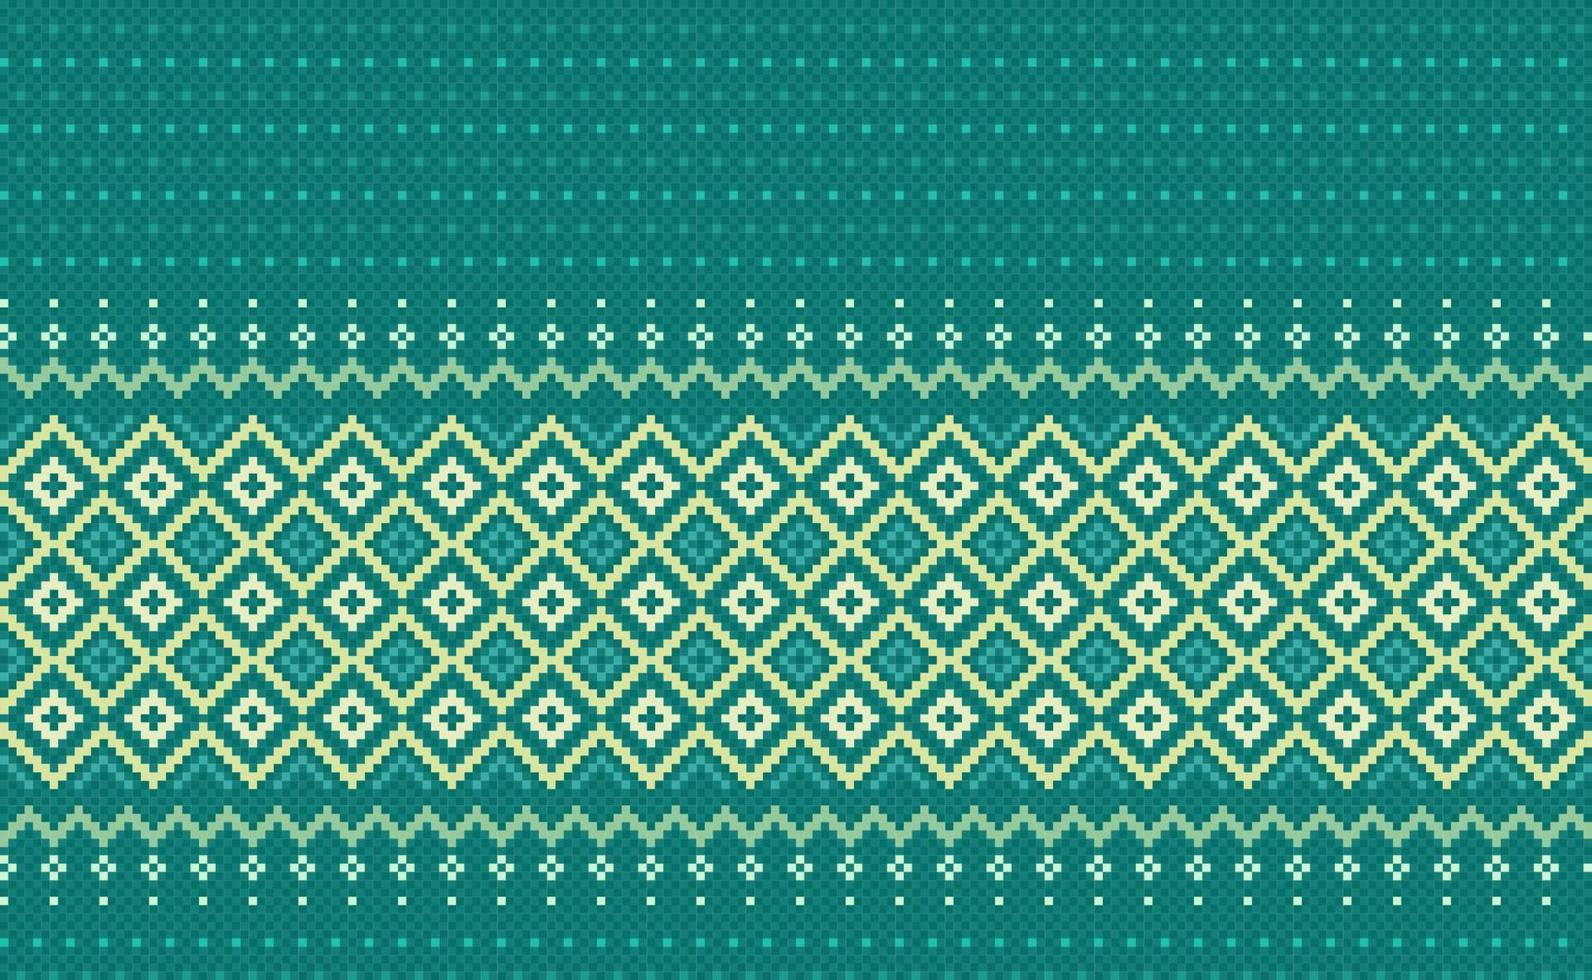 Embroidery ethnic pattern, Green pattern Geometric Nordic background, Cross stitch native aztec style vector